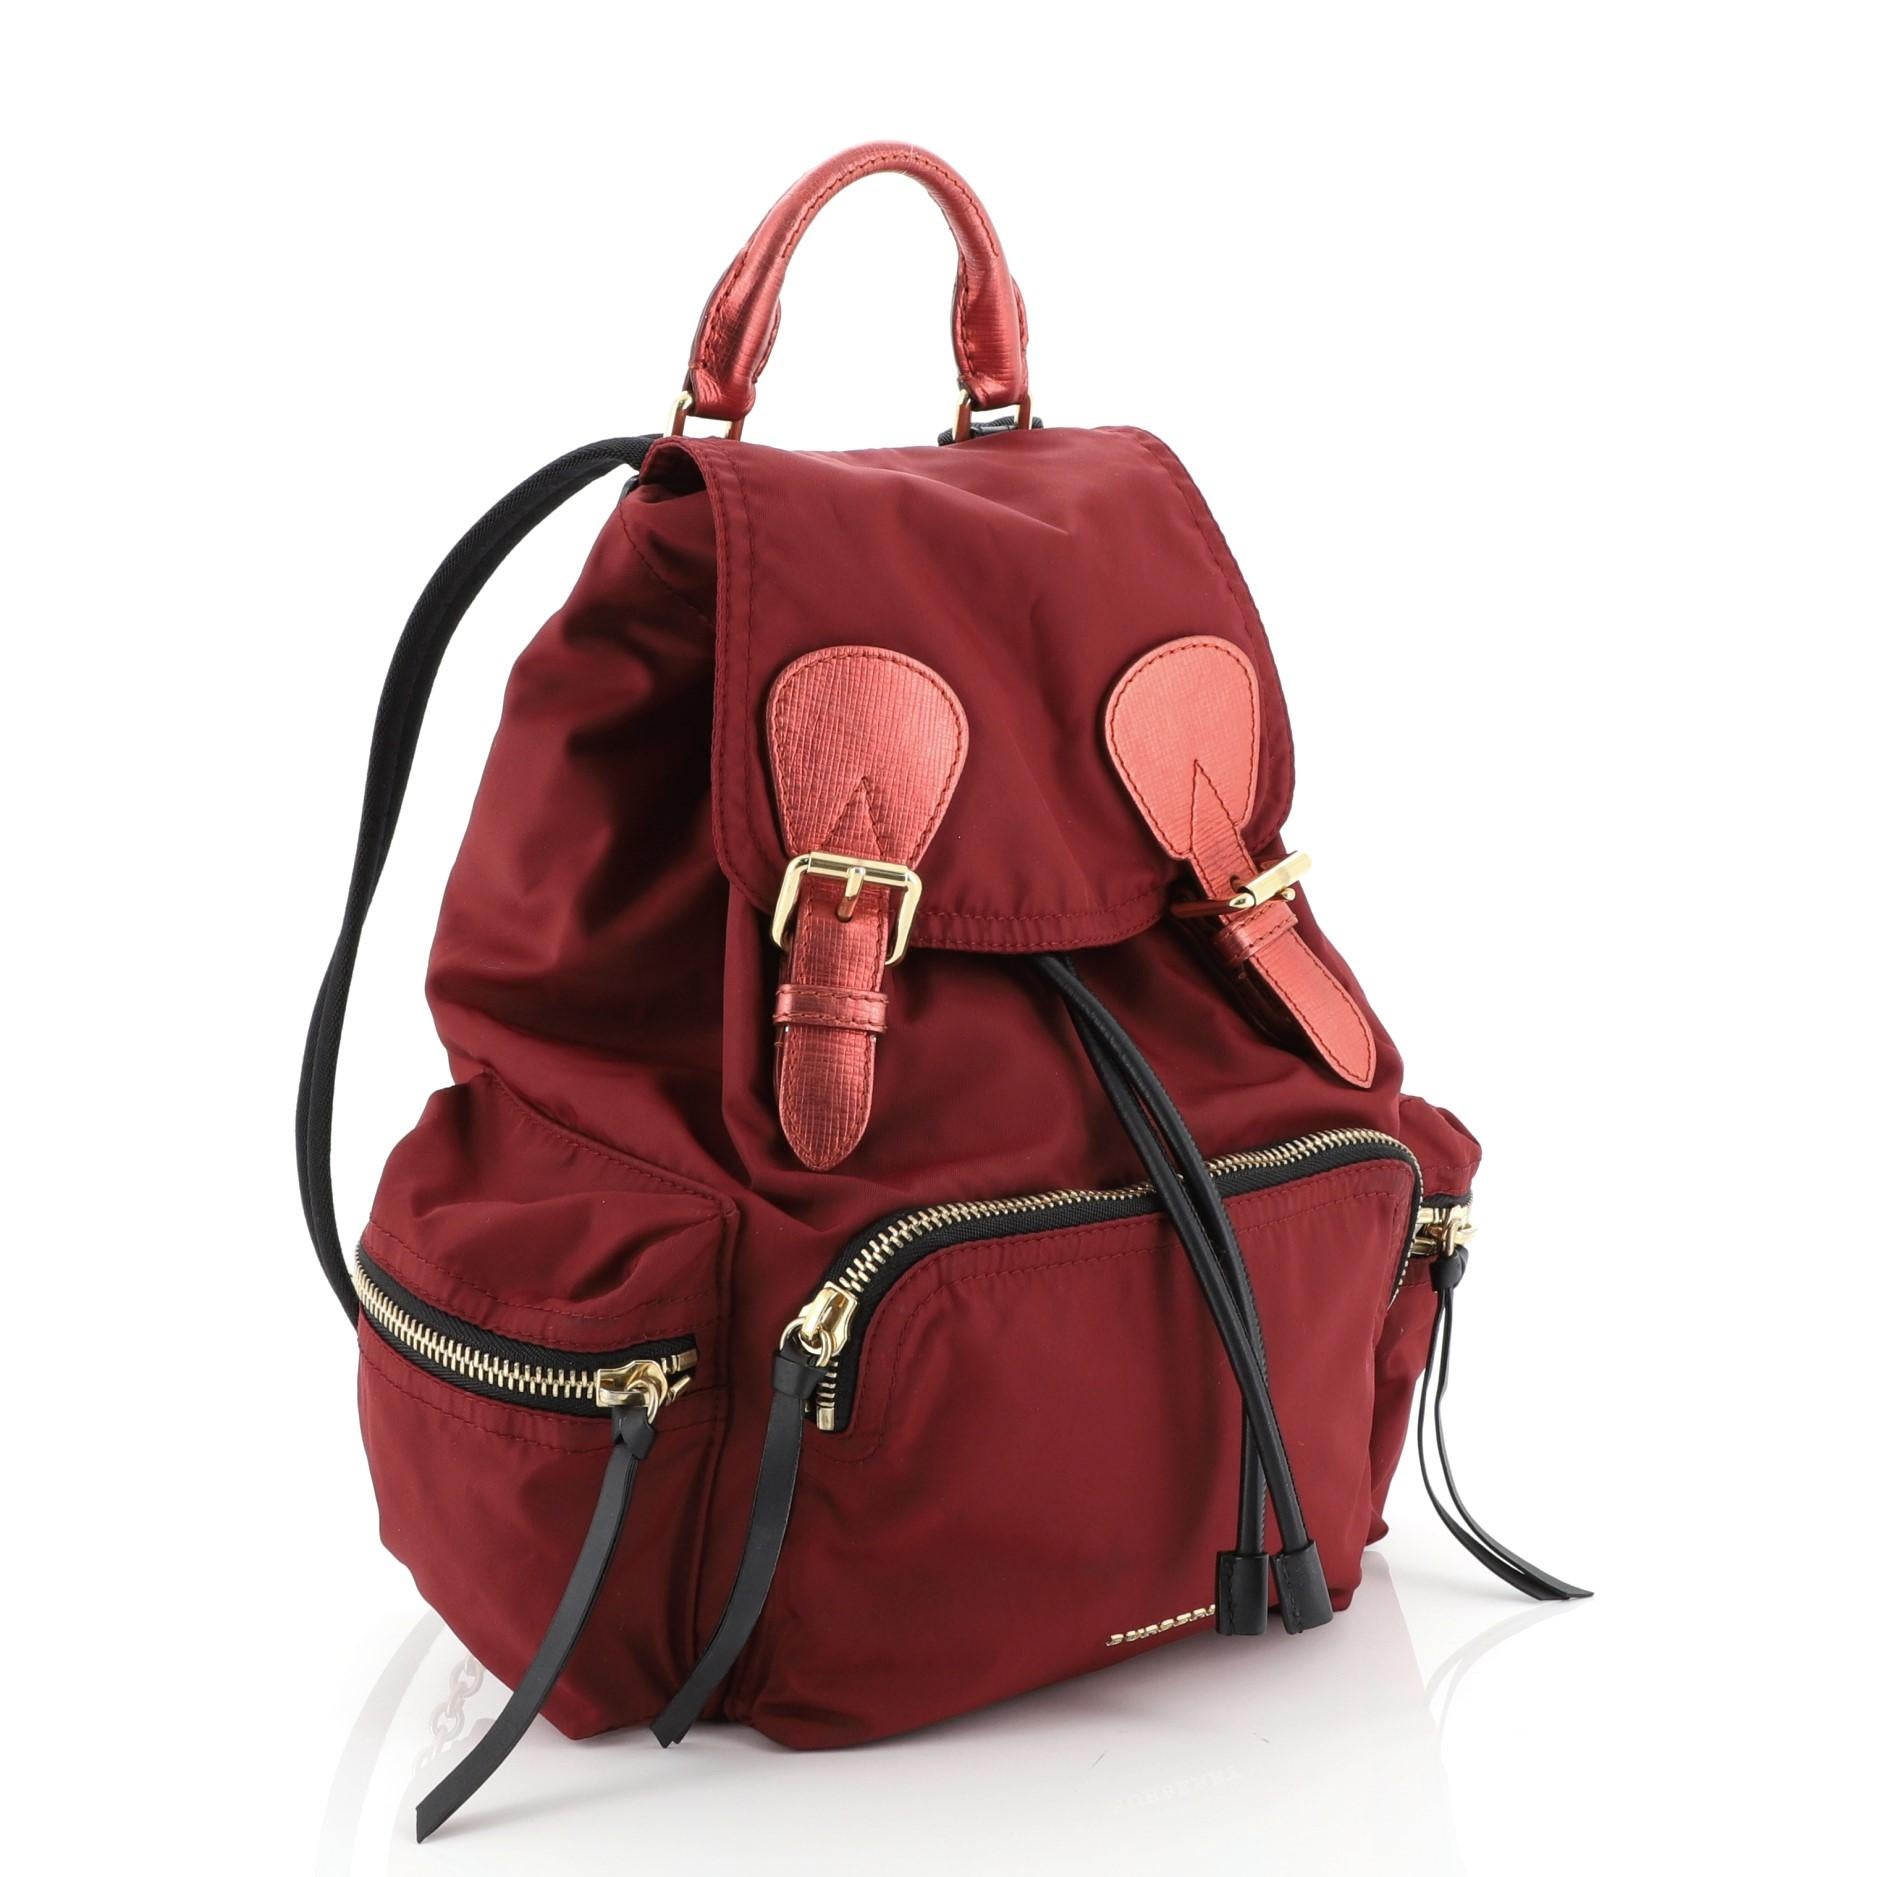 This Burberry Rucksack Backpack Nylon with Leather Medium, crafted from red nylon and leather, features a leather top handle, exterior zip pockets, quilted back panel, and gold-tone hardware. Its drawstring under snap-tab flap closure opens to a